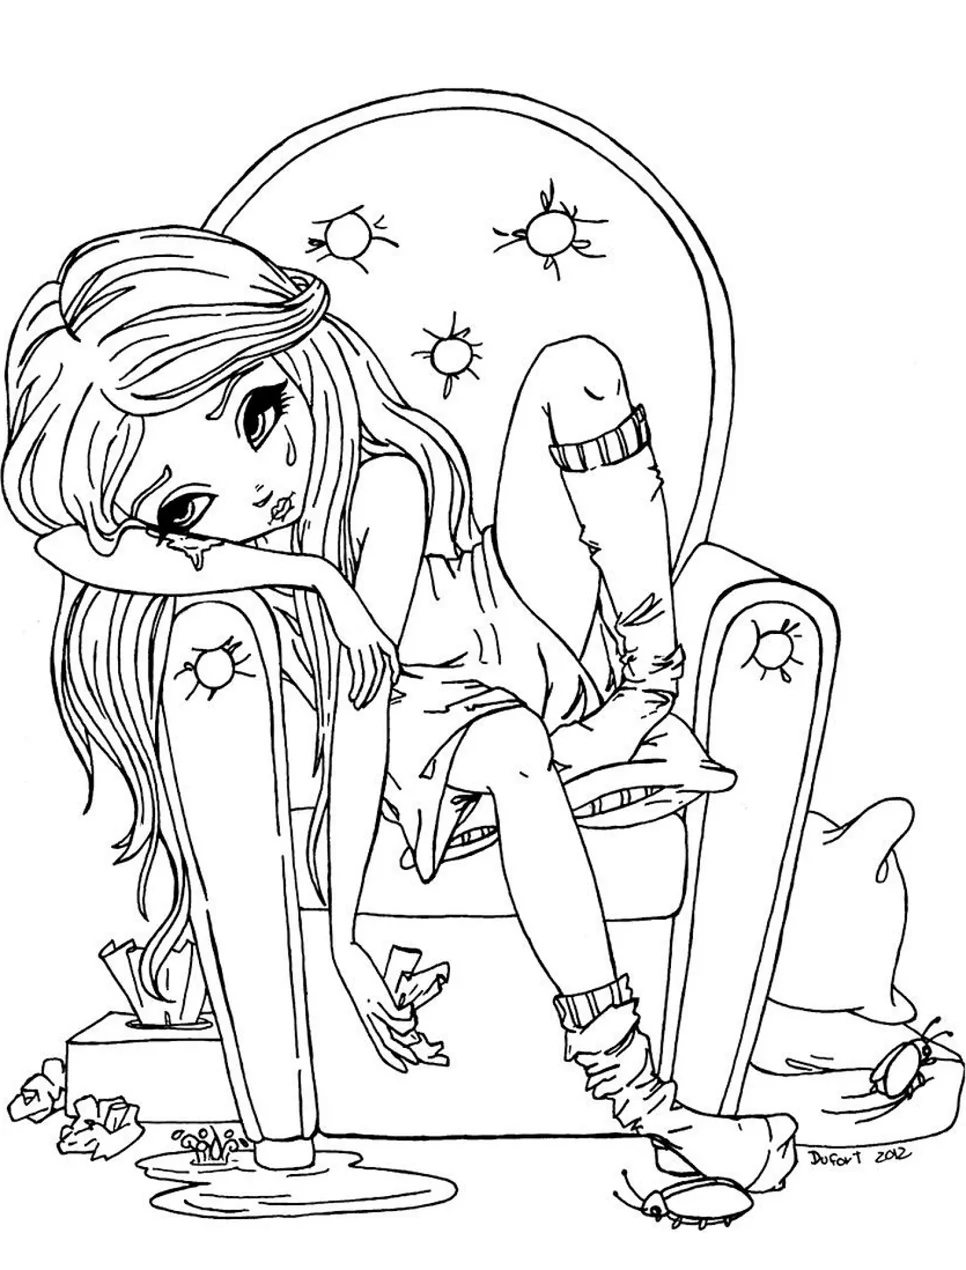 ▷ Lisa Frank: Coloring Pages & Books - 100% FREE and printable!